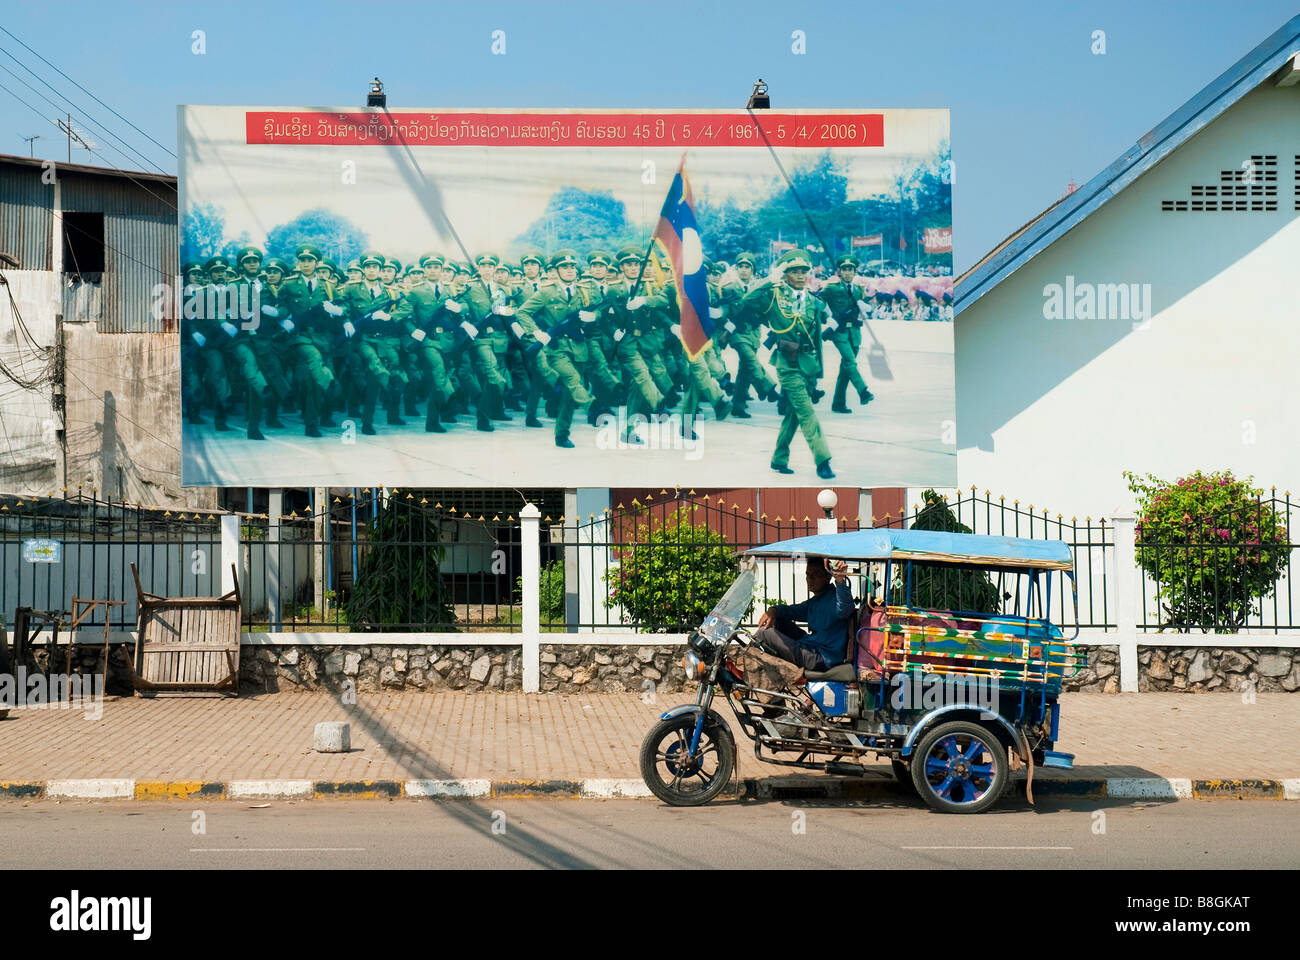 vientiane city laos asia street propaganda military political communist army with taxi Stock Photo